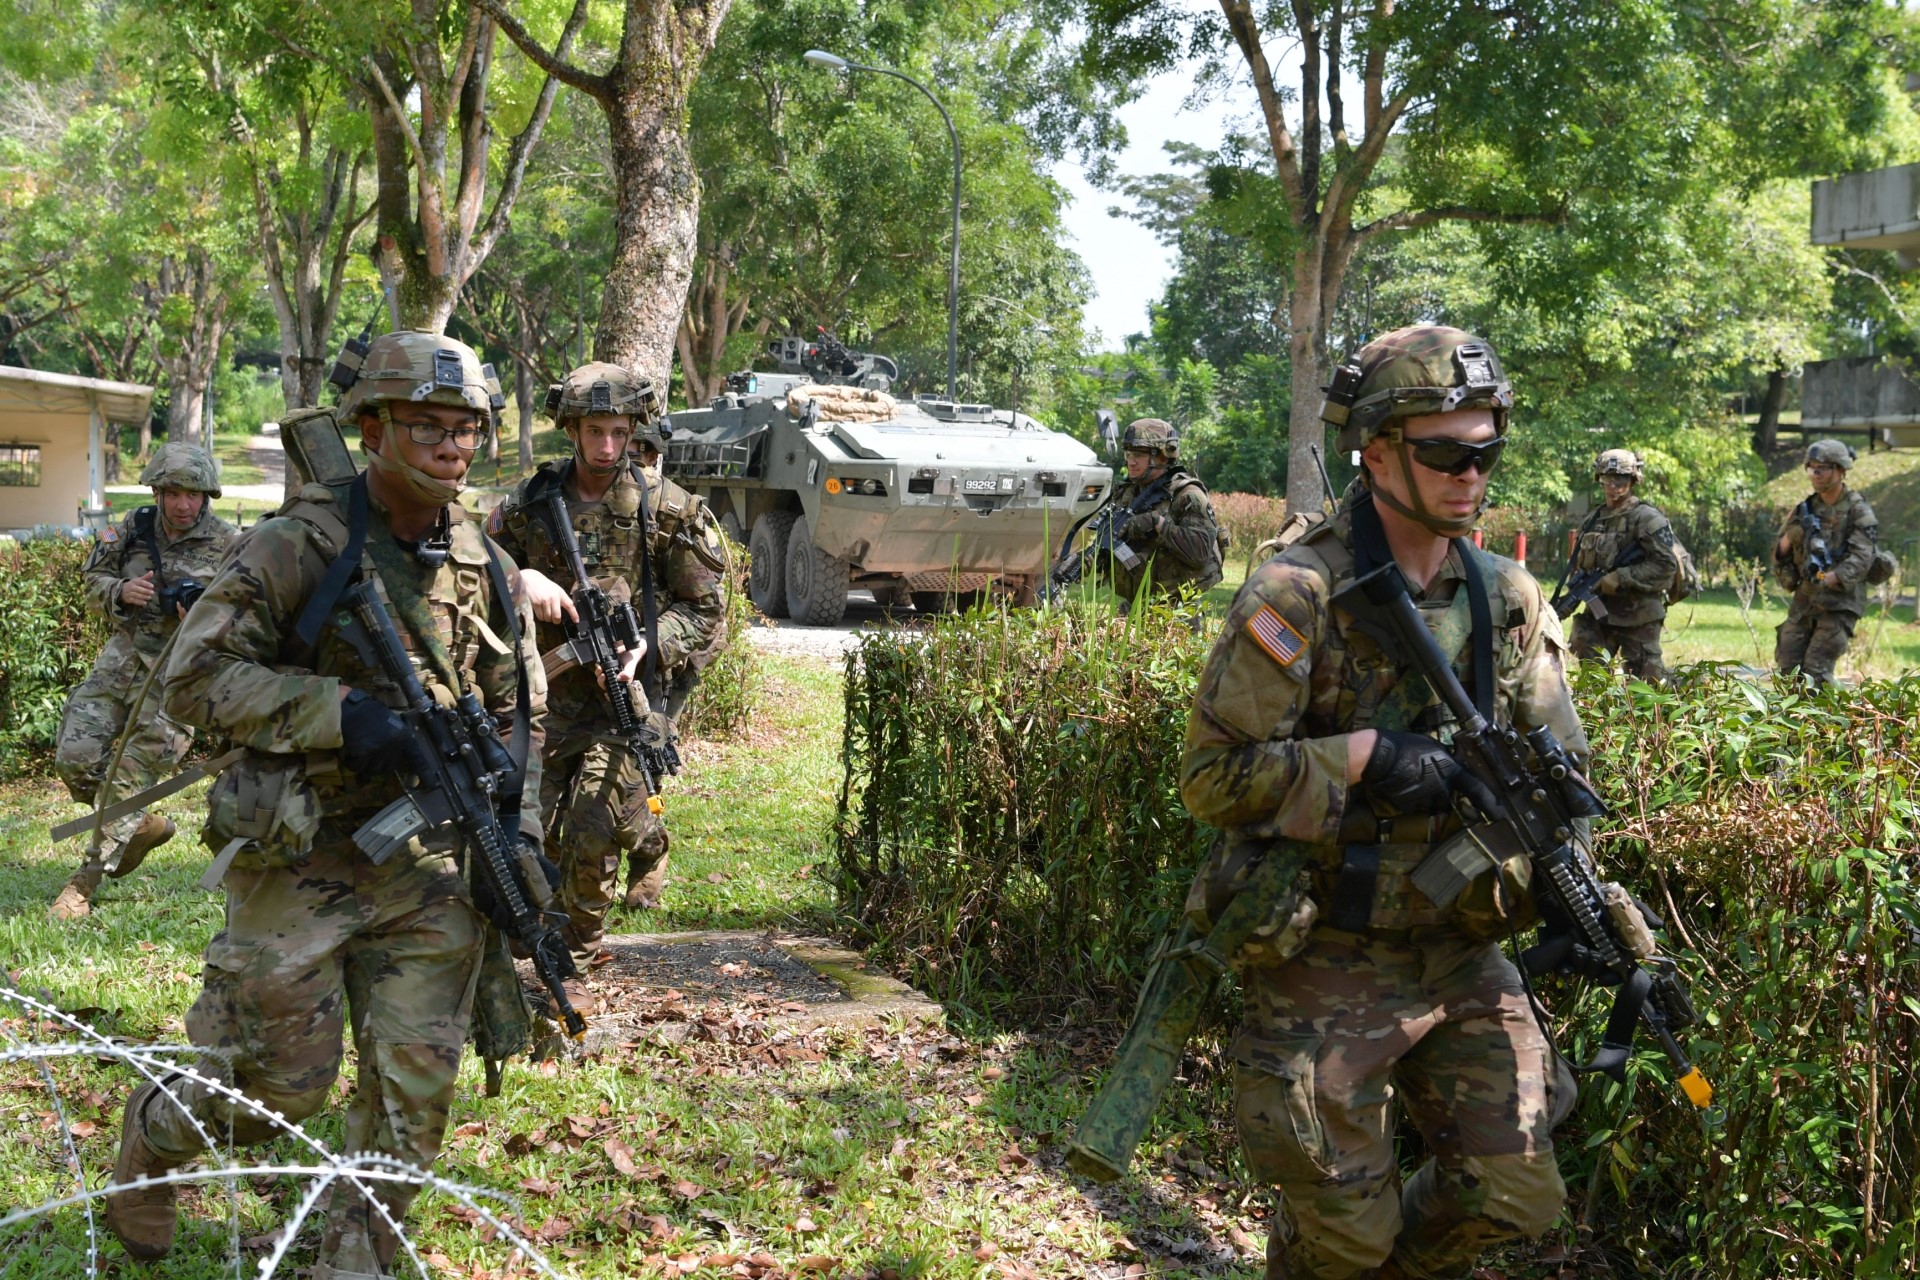 US Army personnel advancing on an urban objective at Murai Urban Training Facility.